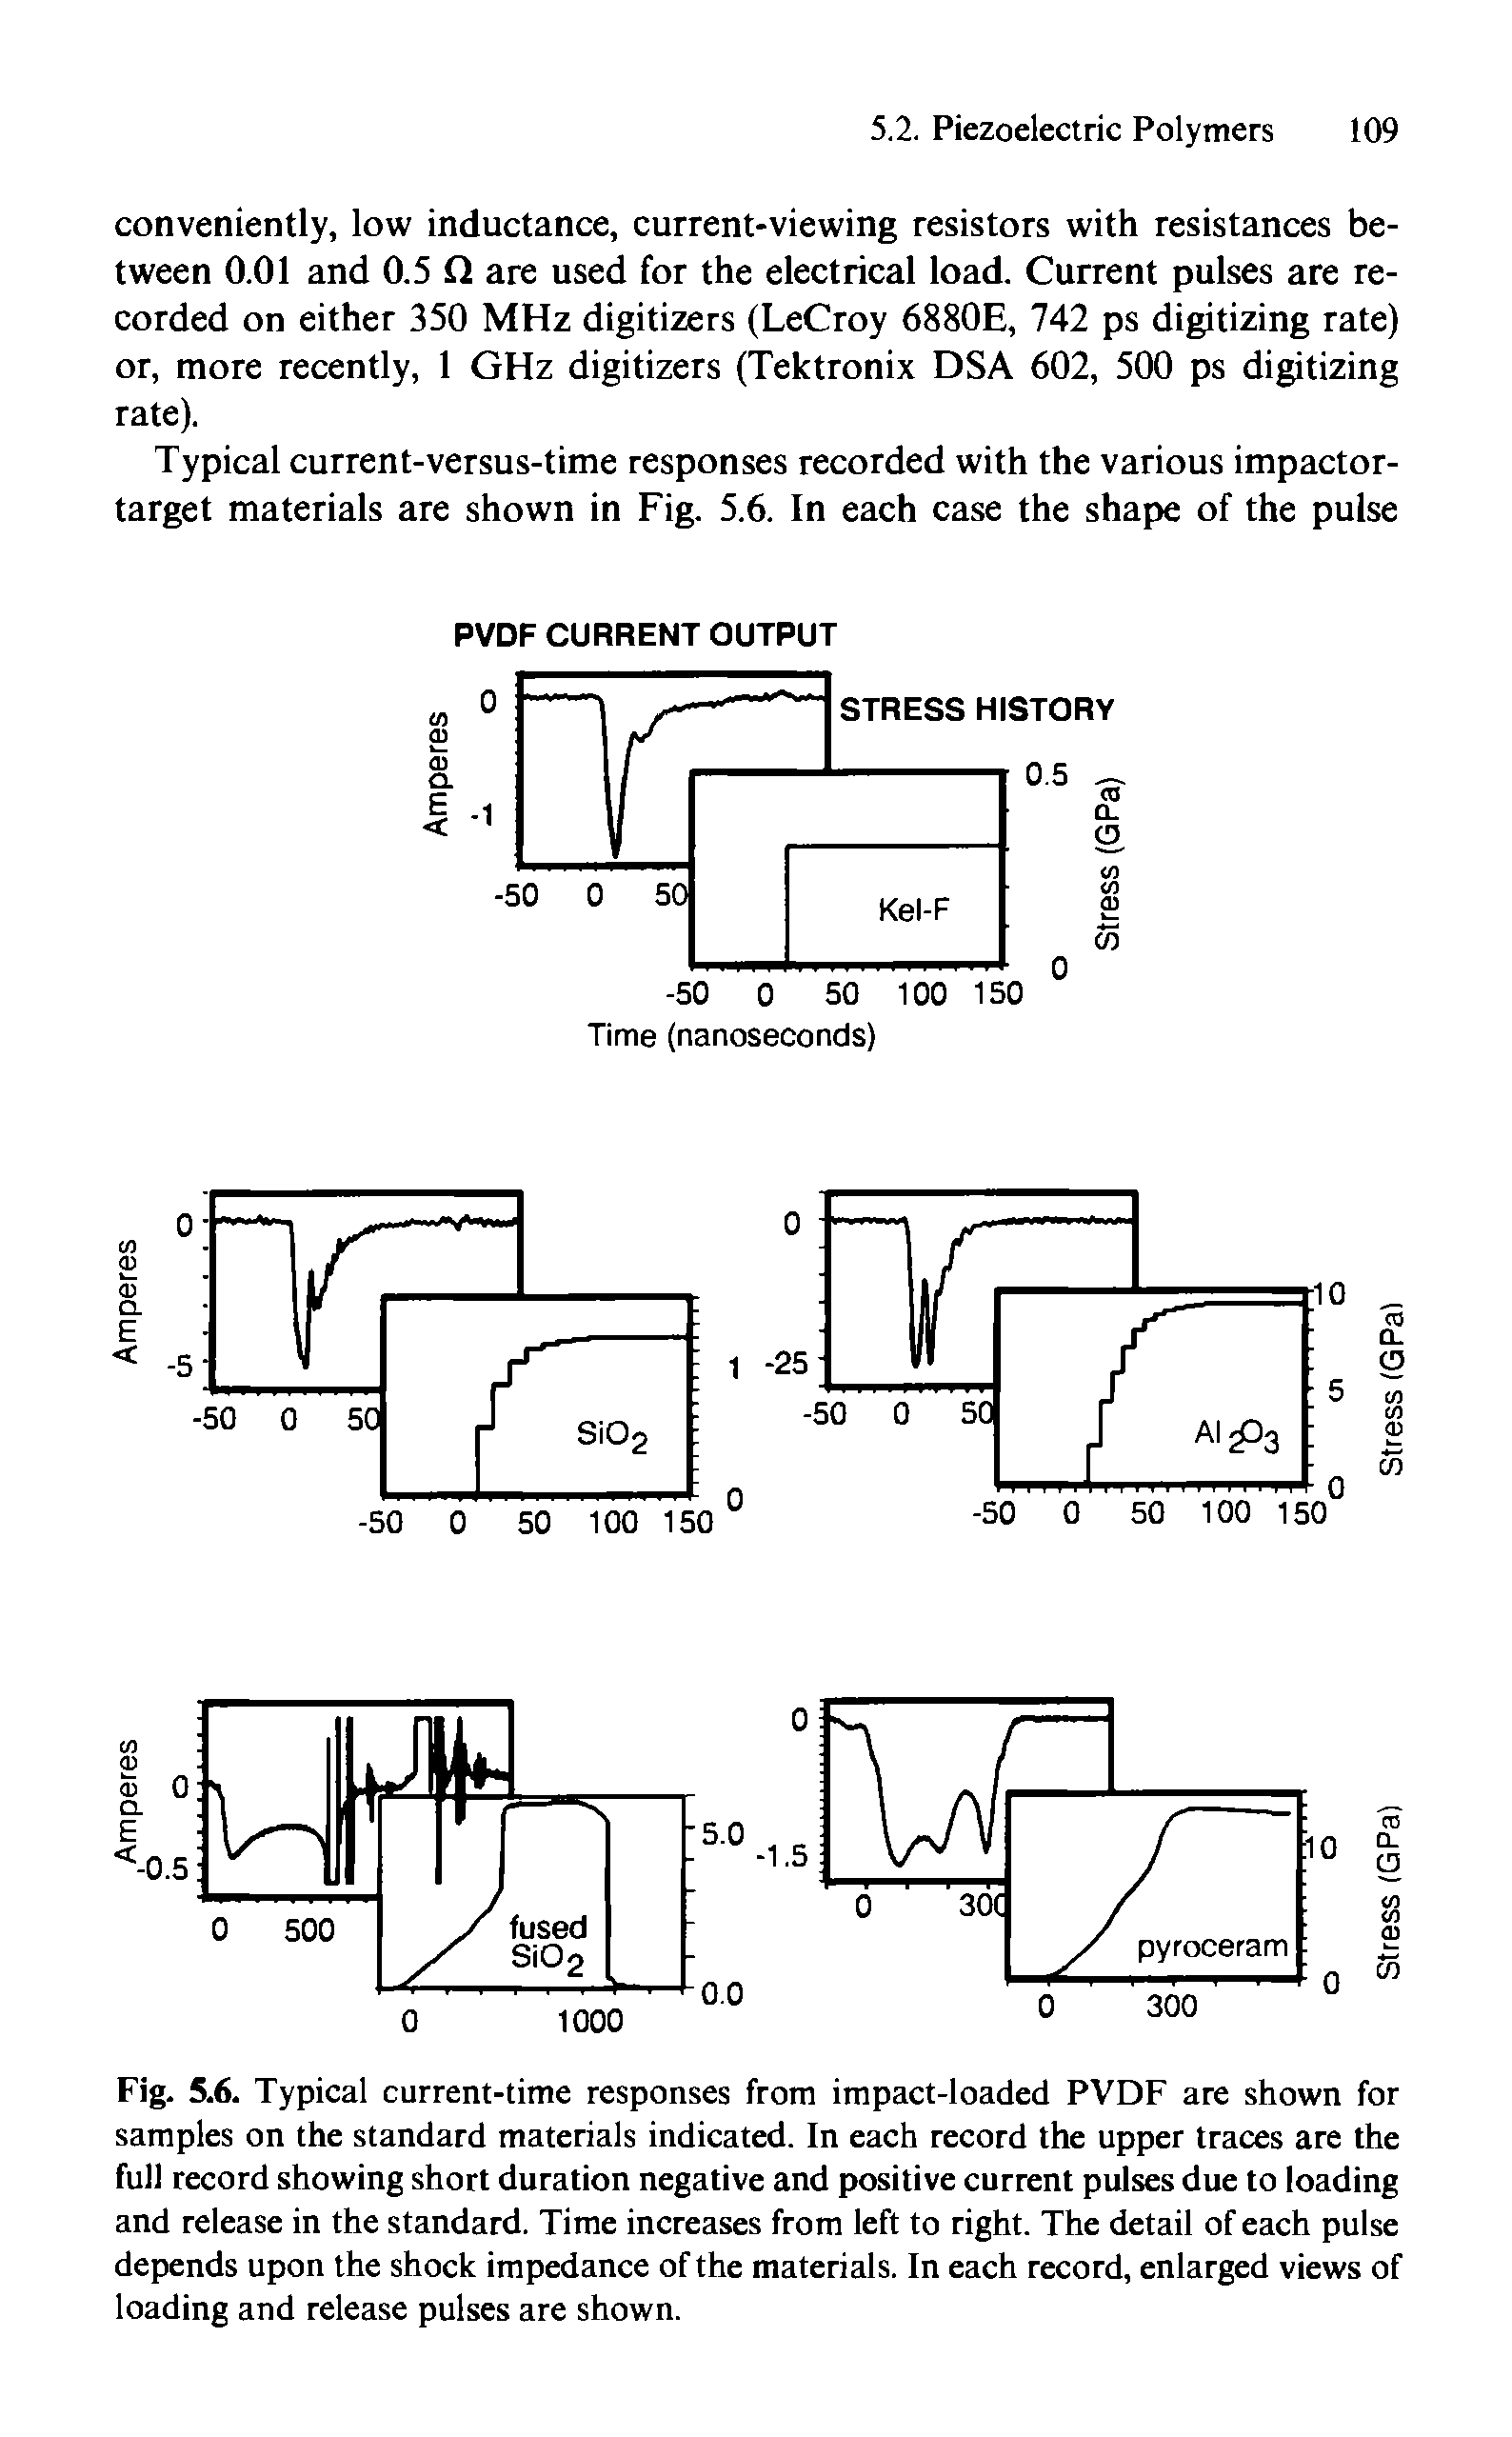 Fig. 5.6. Typical current-time responses from impact-loaded PVDF are shown for samples on the standard materials indicated. In each record the upper traces are the full record showing short duration negative and positive current pulses due to loading and release in the standard. Time increases from left to right. The detail of each pulse depends upon the shock impedance of the materials. In each record, enlarged views of loading and release pulses are shown.